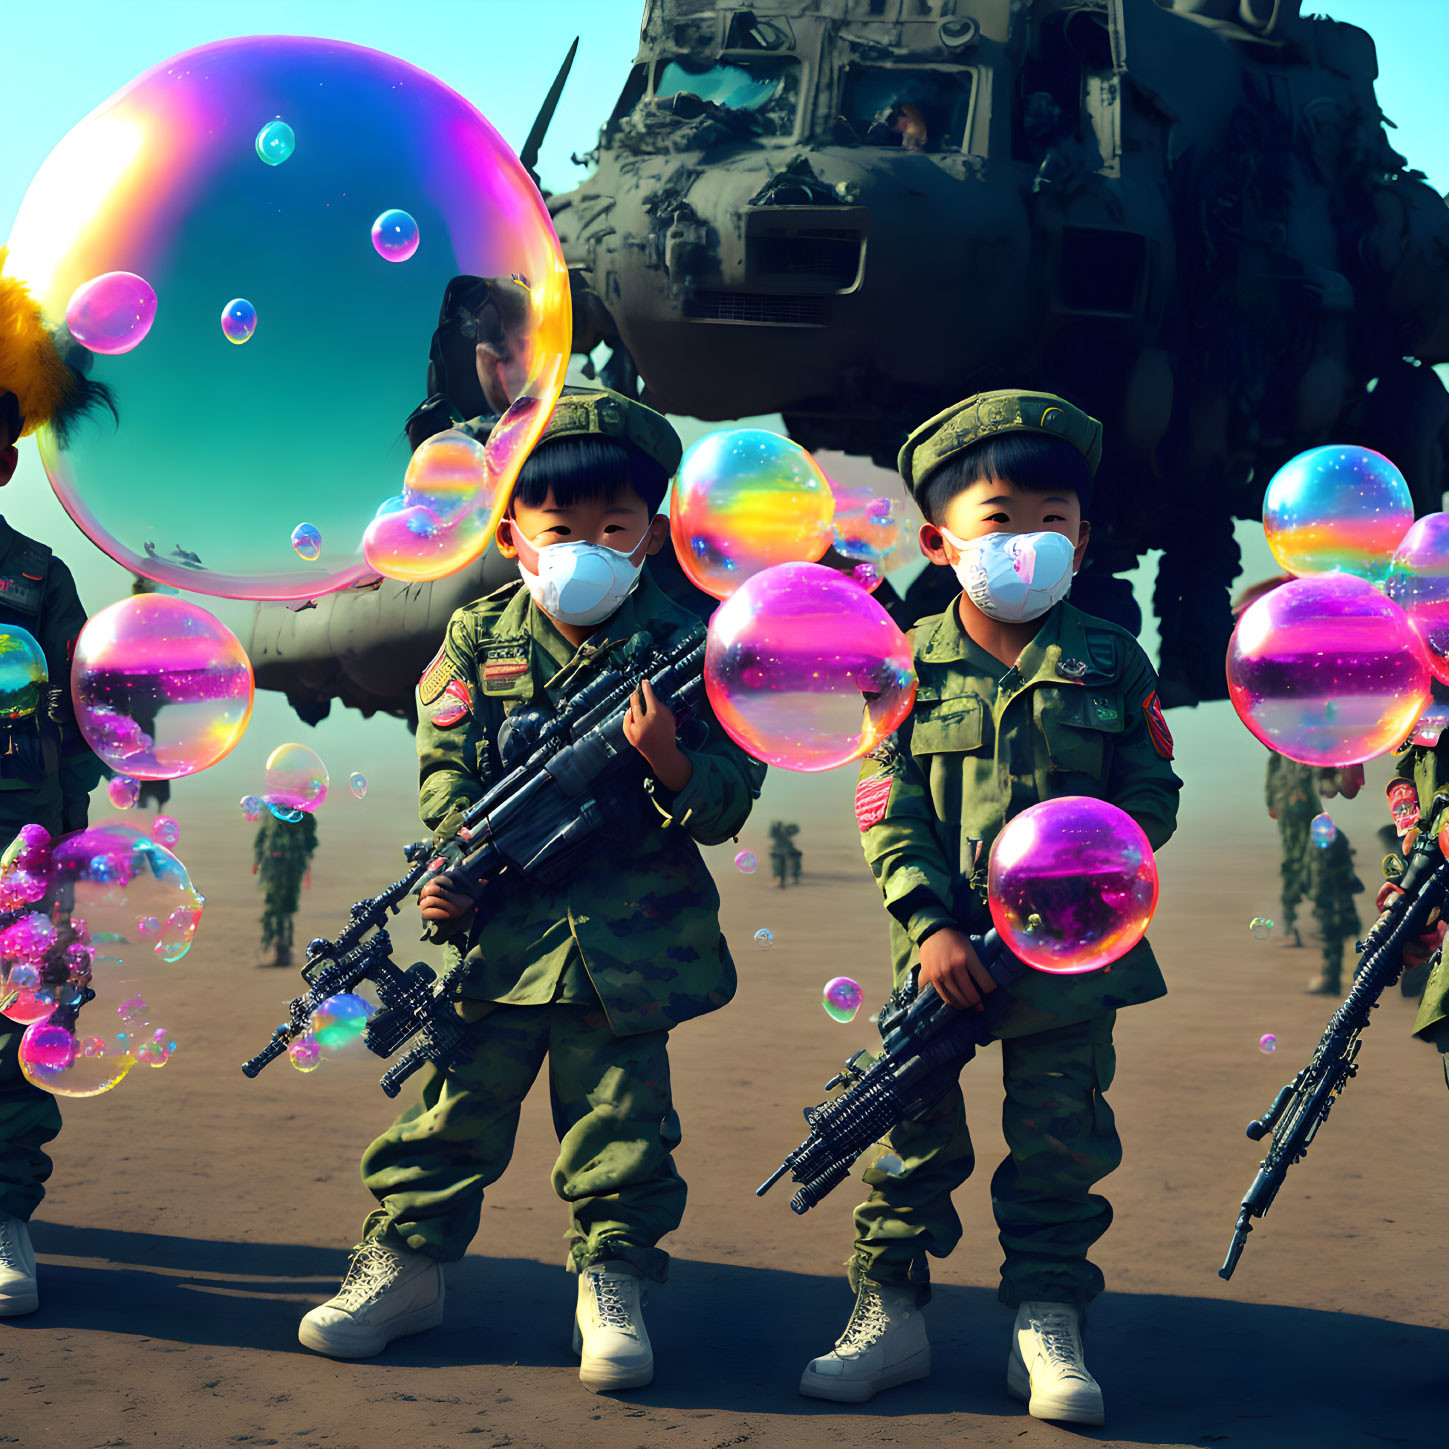 Young children in military attire with toy guns near tank in bubble-filled scene